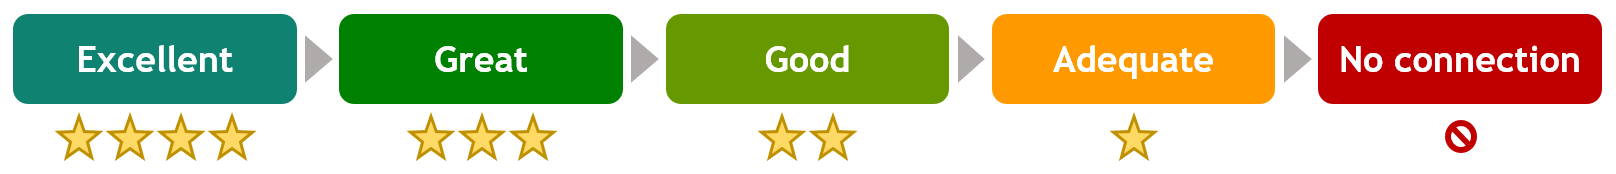 Excellent, four stars. Great, three stars. Good, two stars. Adequate, one star. No connection, a circle with a diagonal line from upper left to lower right.